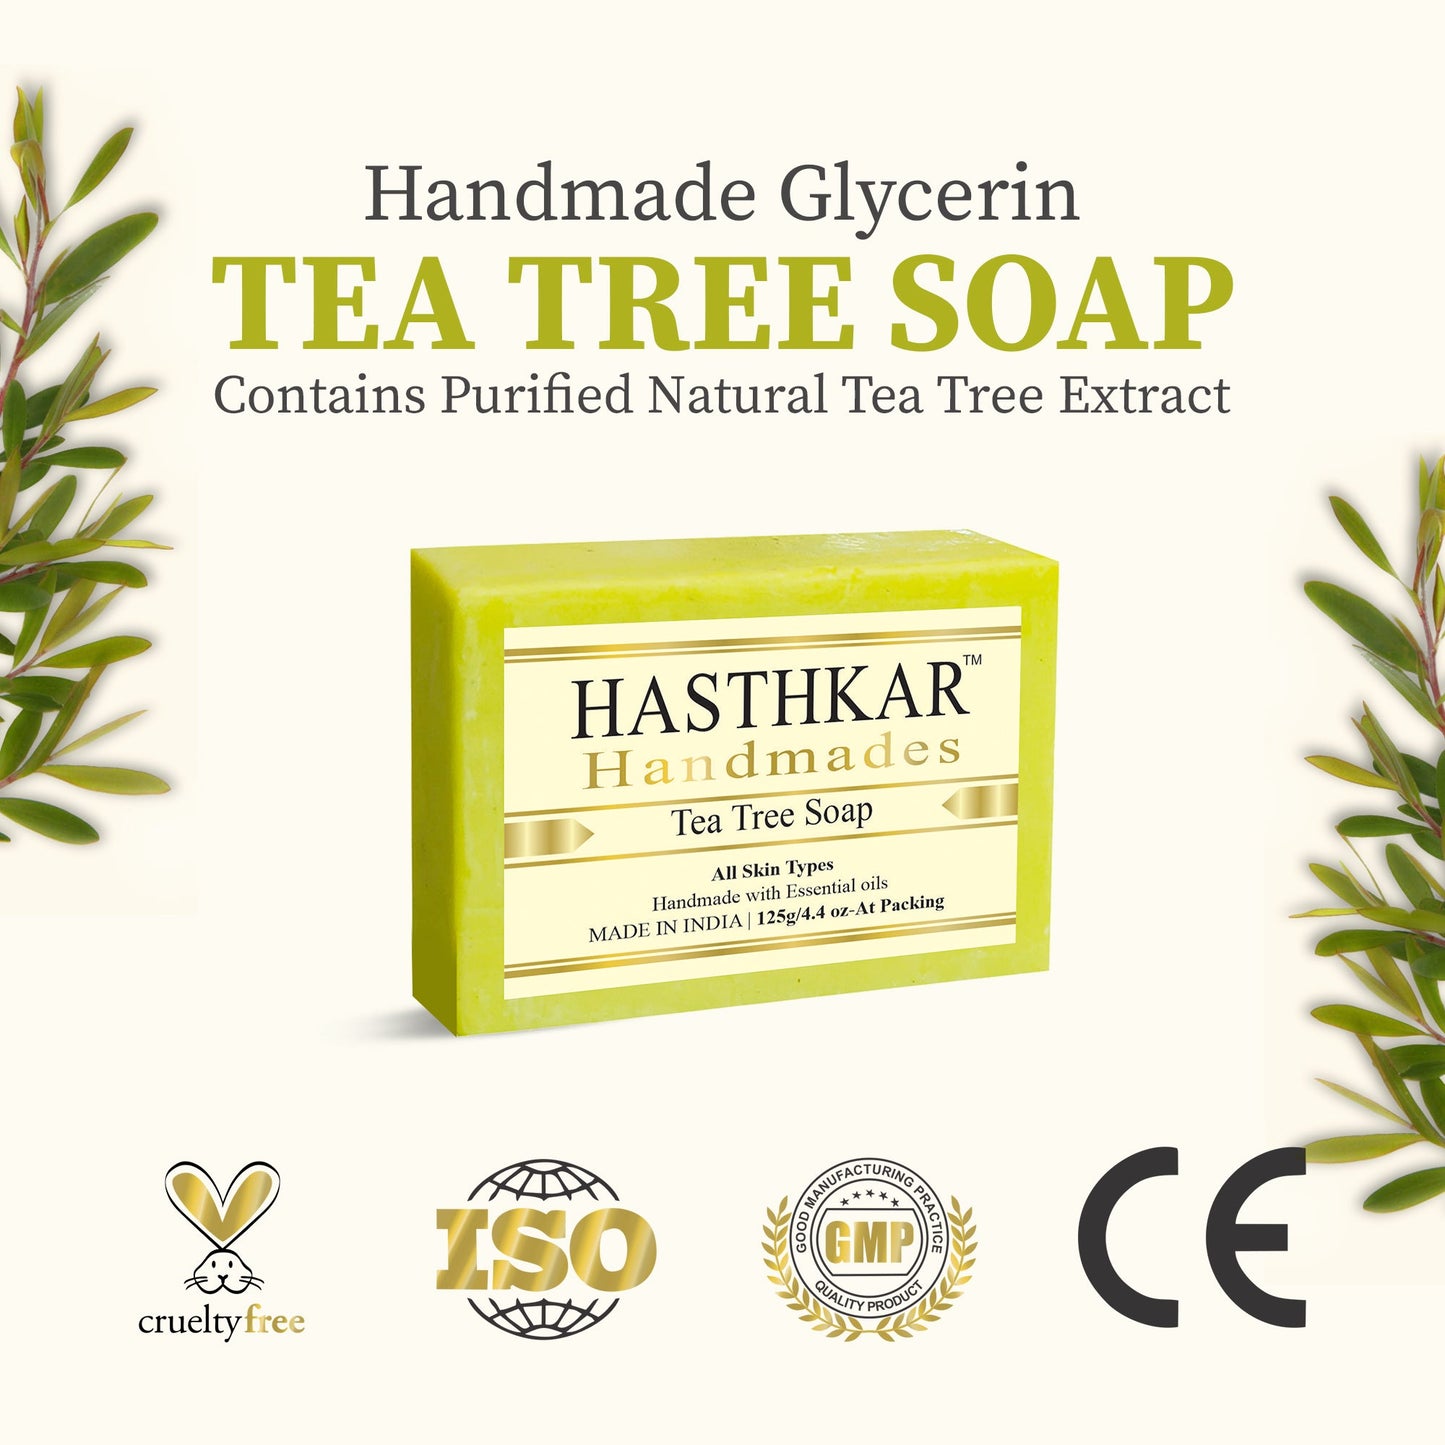 Hasthkar Handmades Glycerine Tea Tree Soap For Soothe Dry Skin By Reducing Itching | Swelling And Irritation With Its Anti-Inflammatory Properties | Combatting Acne | Help To Reduce Acne Scars And Redness - 125Gm